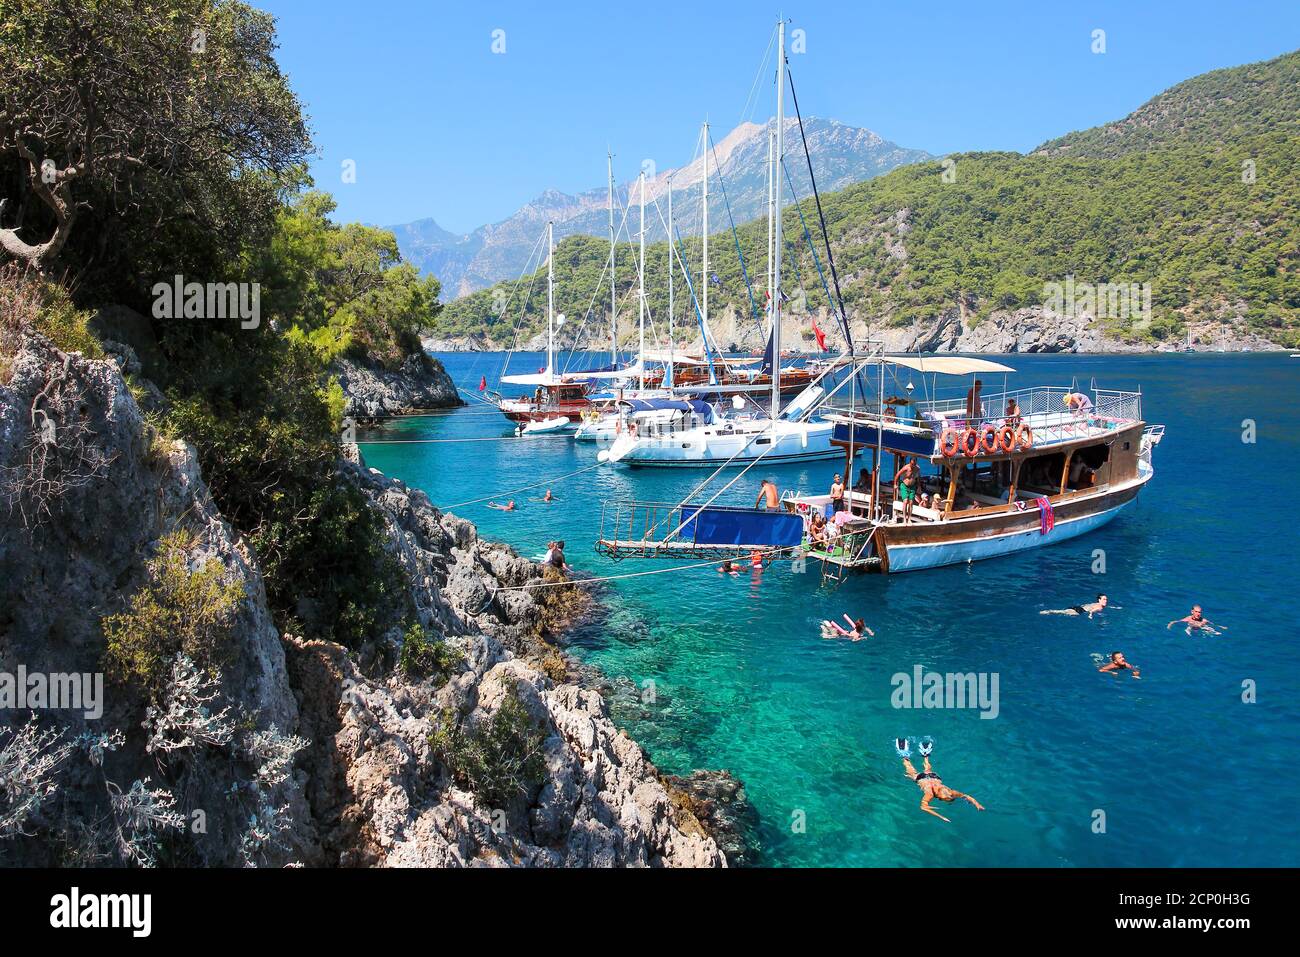 Oludeniz, Fethiye, Turkey - The daily boat trip for holidaymakers Stock Photo